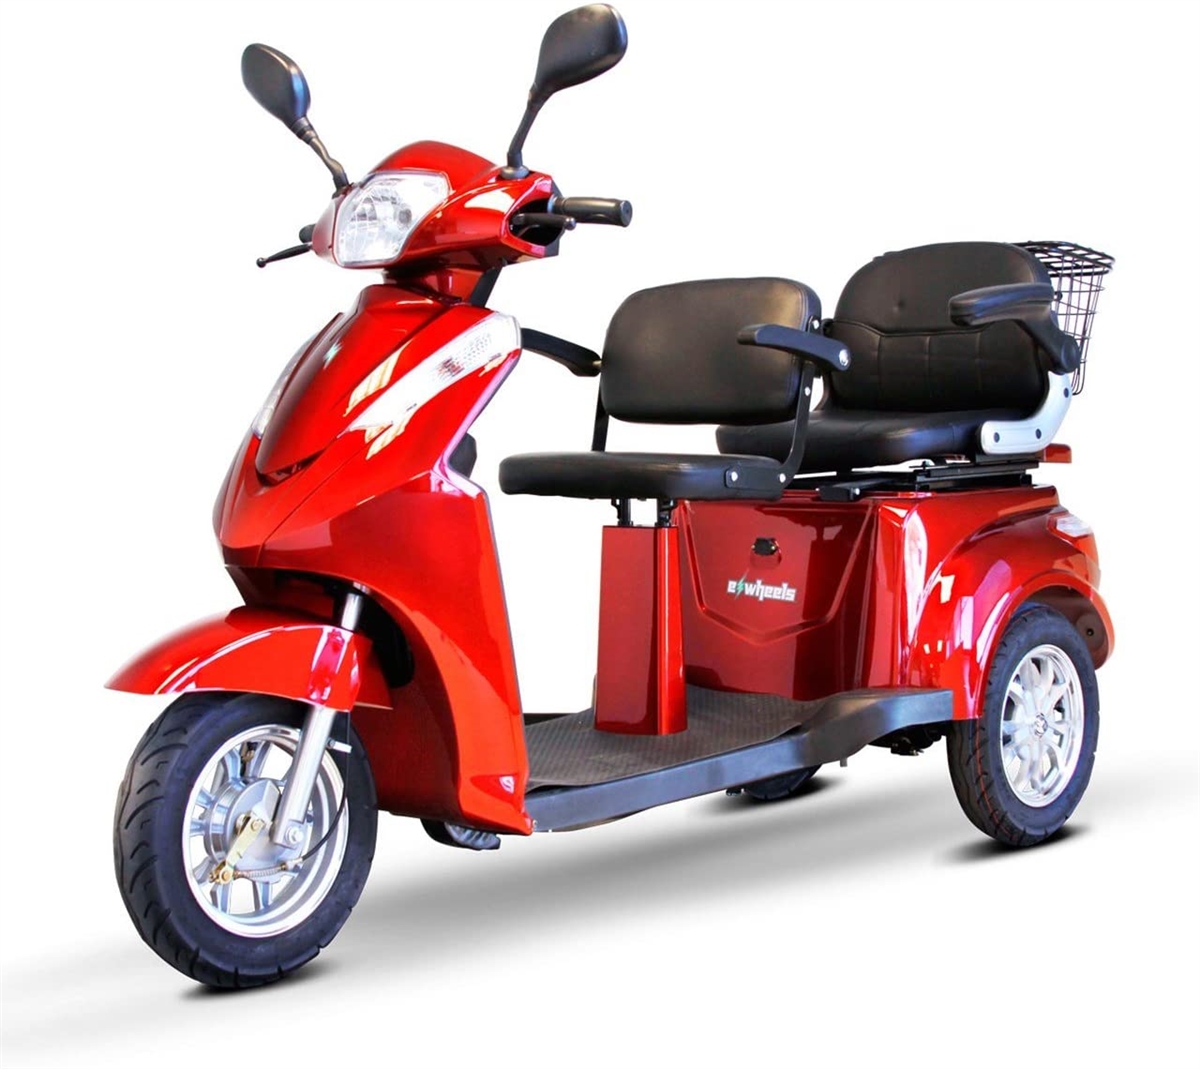 Victory 10 3-Wheel Full-Size Scooter